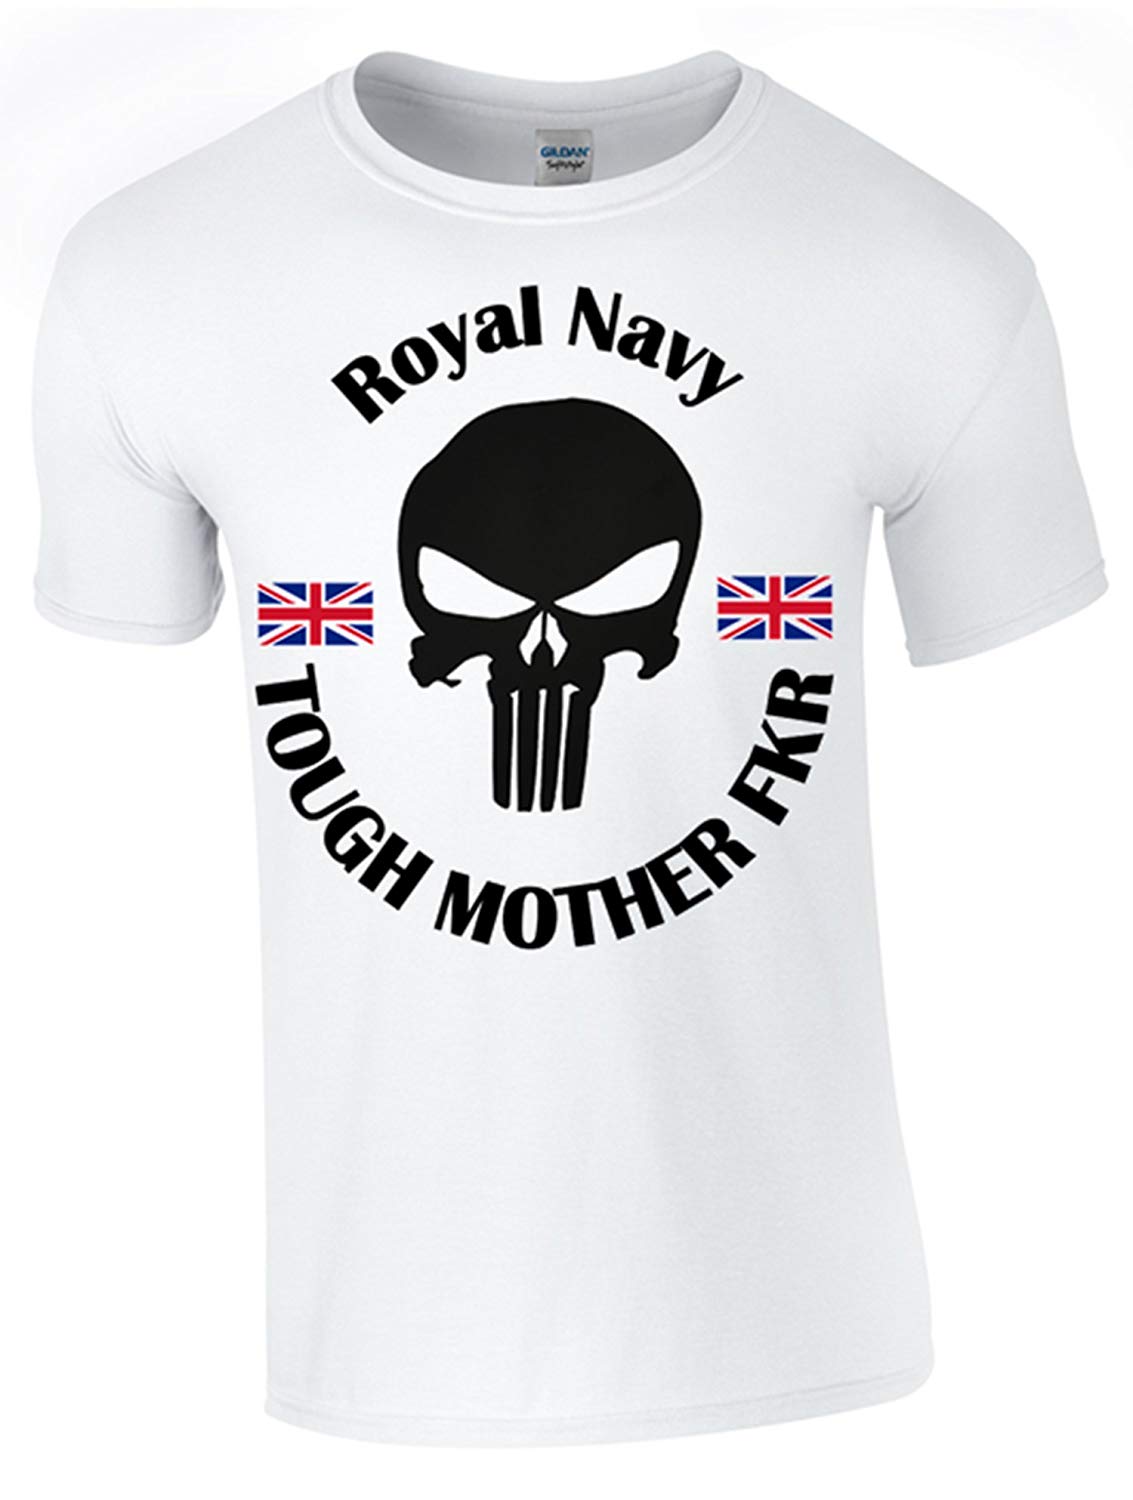 Royal Navy TMF T-Shirt - Army 1157 kit White / XL Army 1157 Kit Veterans Owned Business